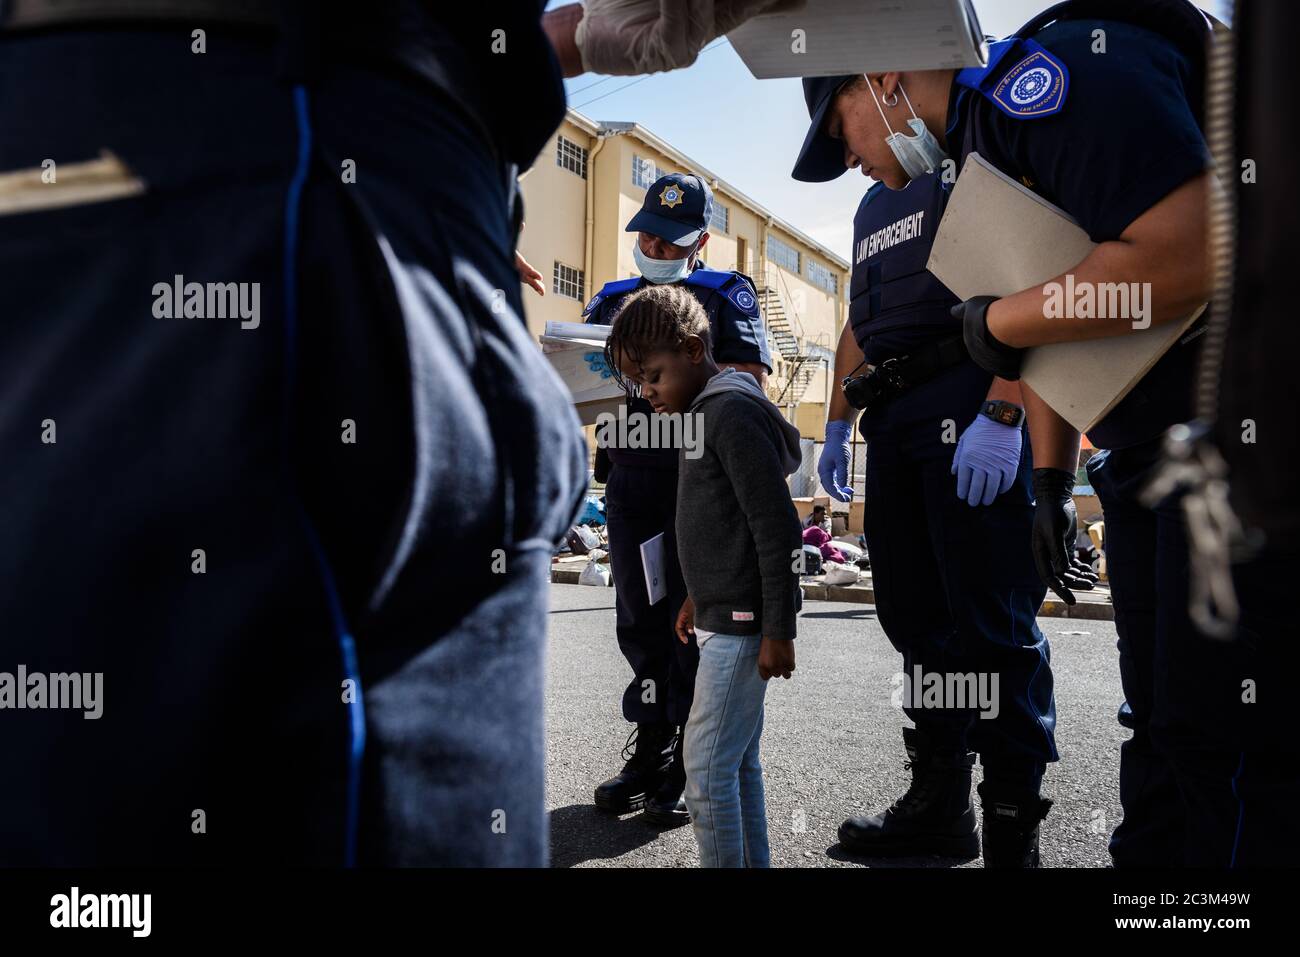 South African metro police crowd an African foreign national child refugee for violating Cape Town's city bye-laws during the coronavirus outbreak Stock Photo